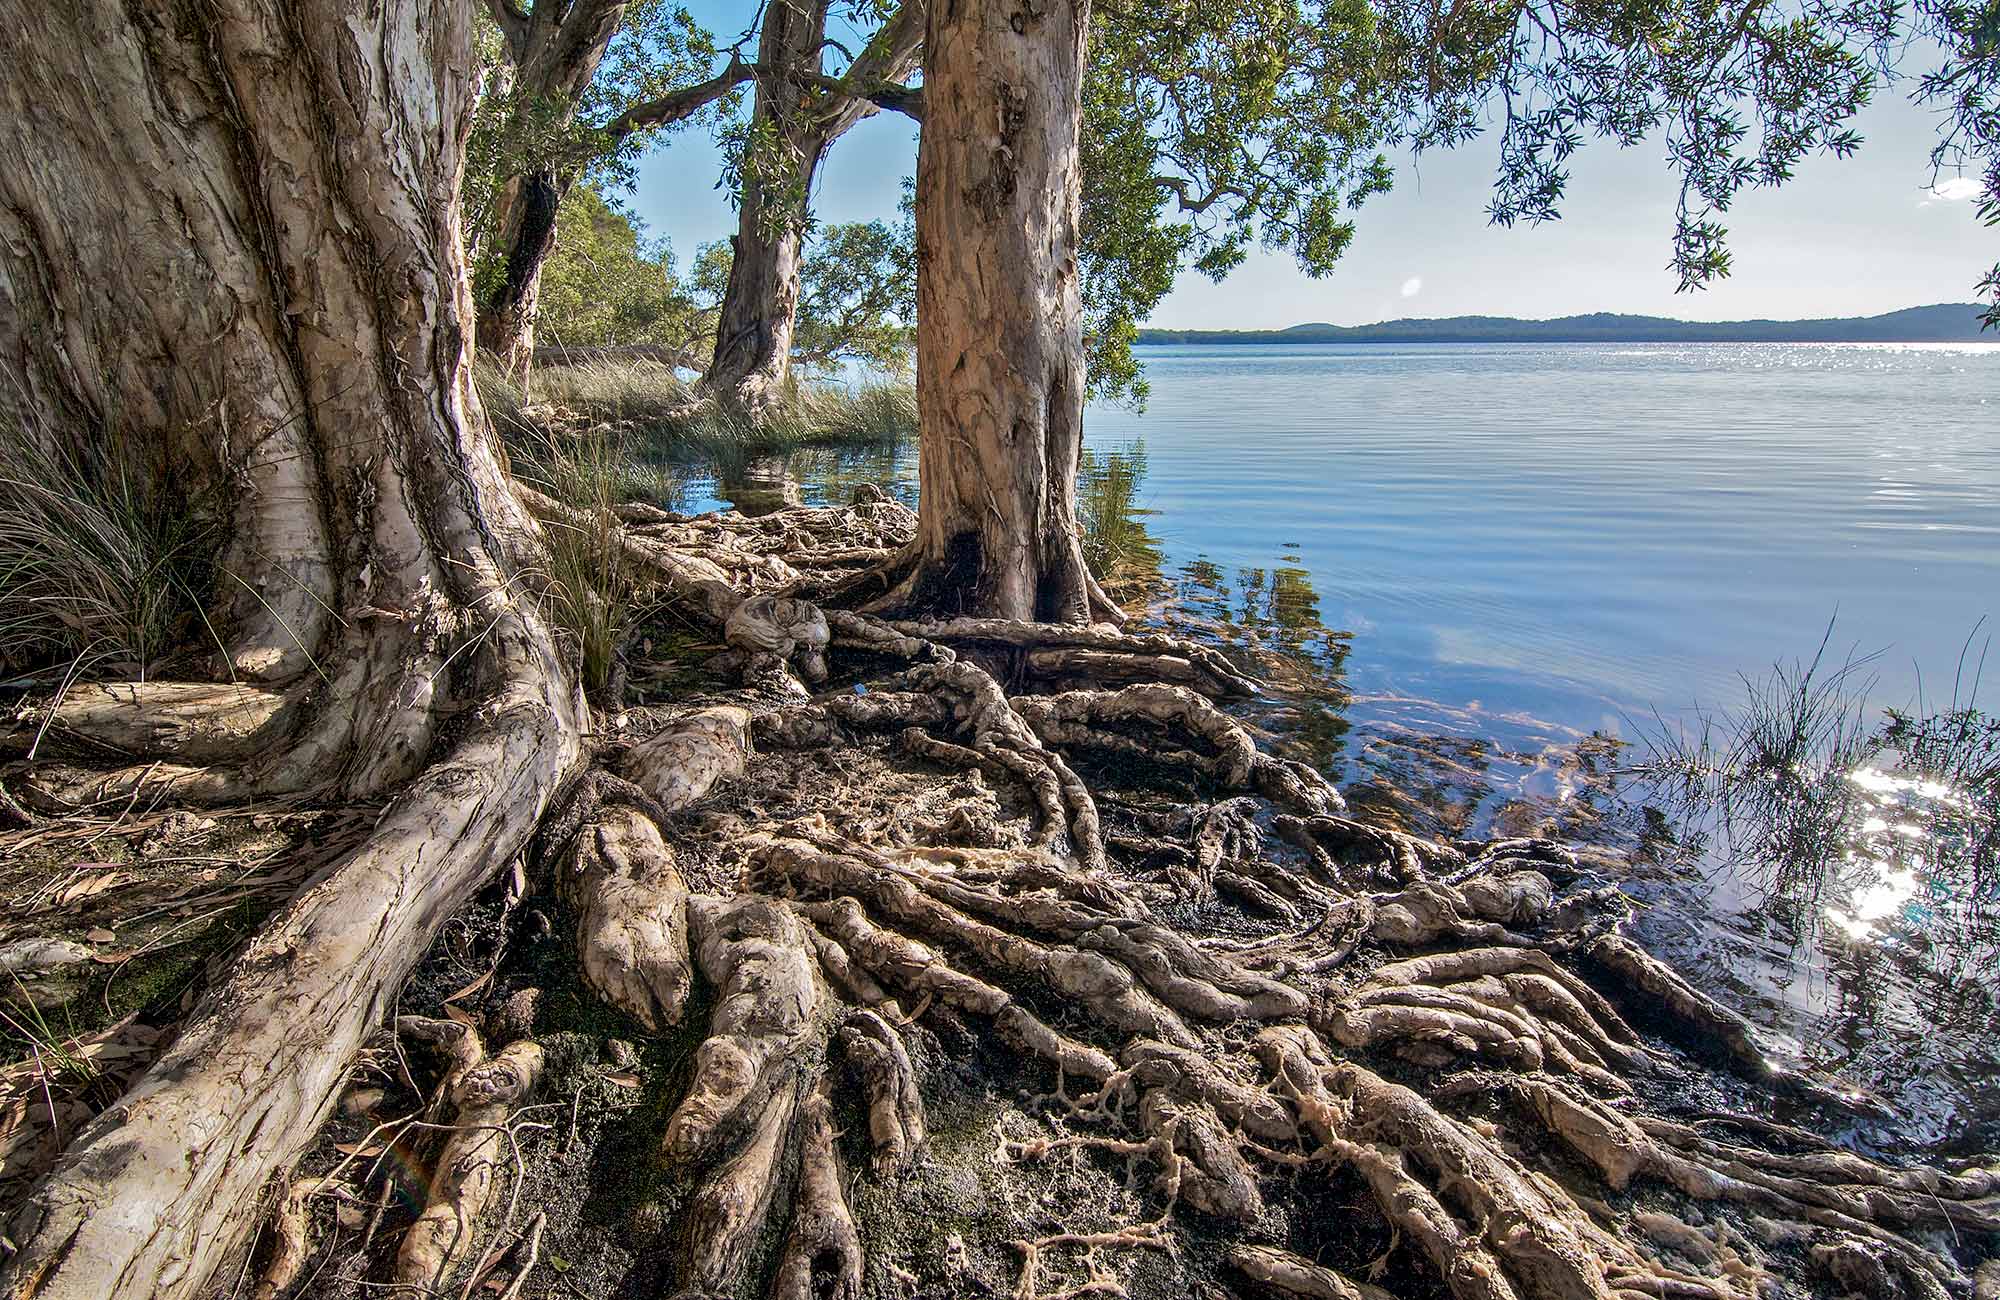 Shelly Beach campground, Myall Lakes National Park. Photo: John Spencer